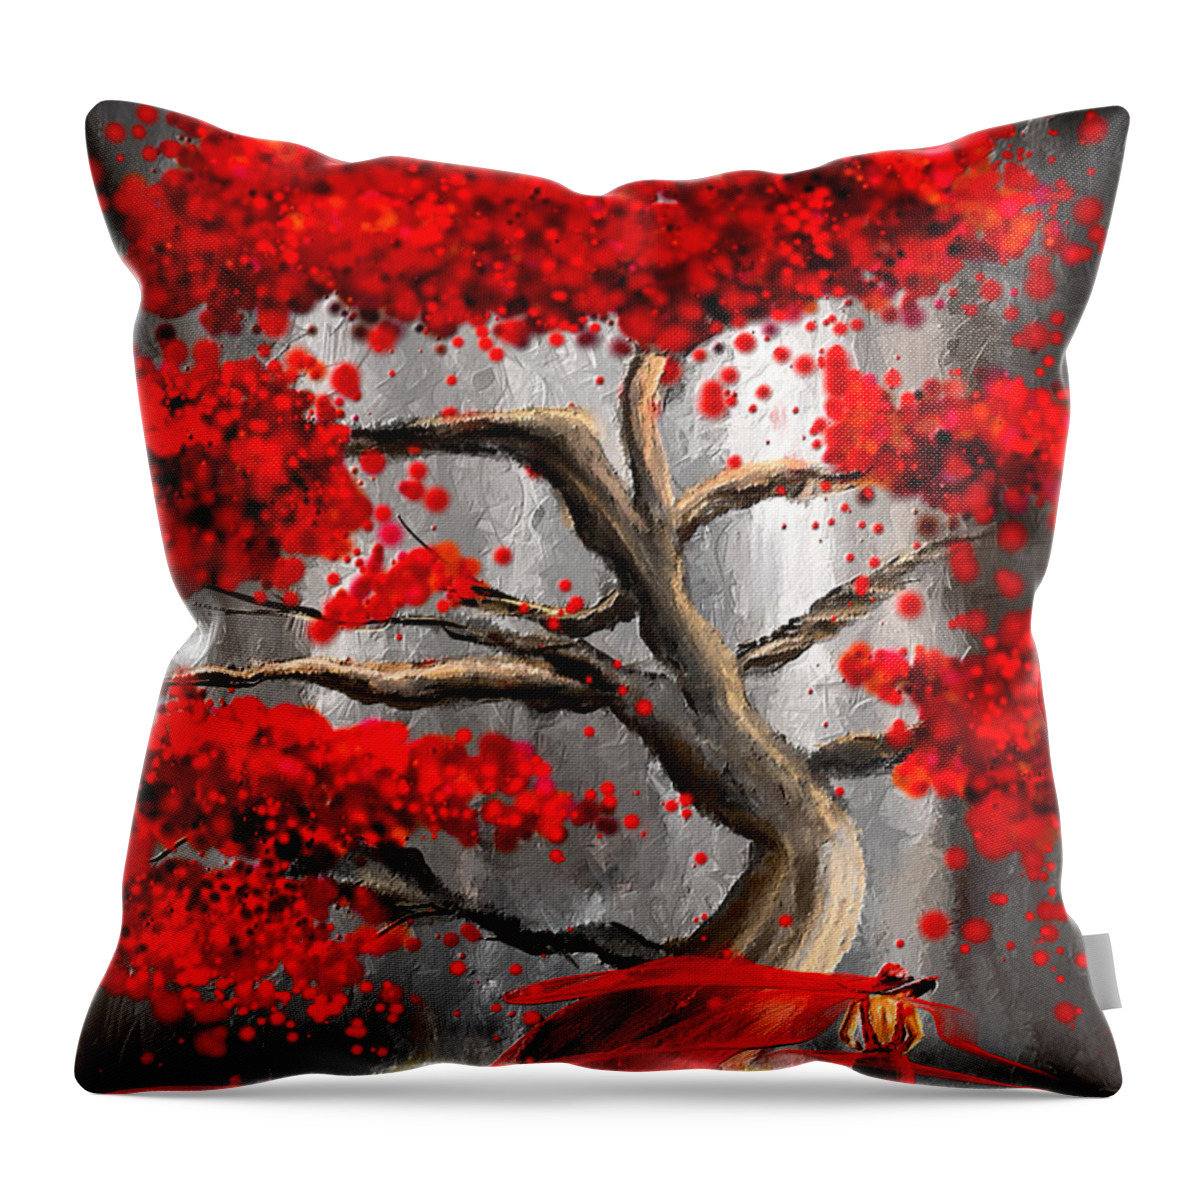 Red And Gray Throw Pillow featuring the painting True Love Waits - Red And Gray Art by Lourry Legarde